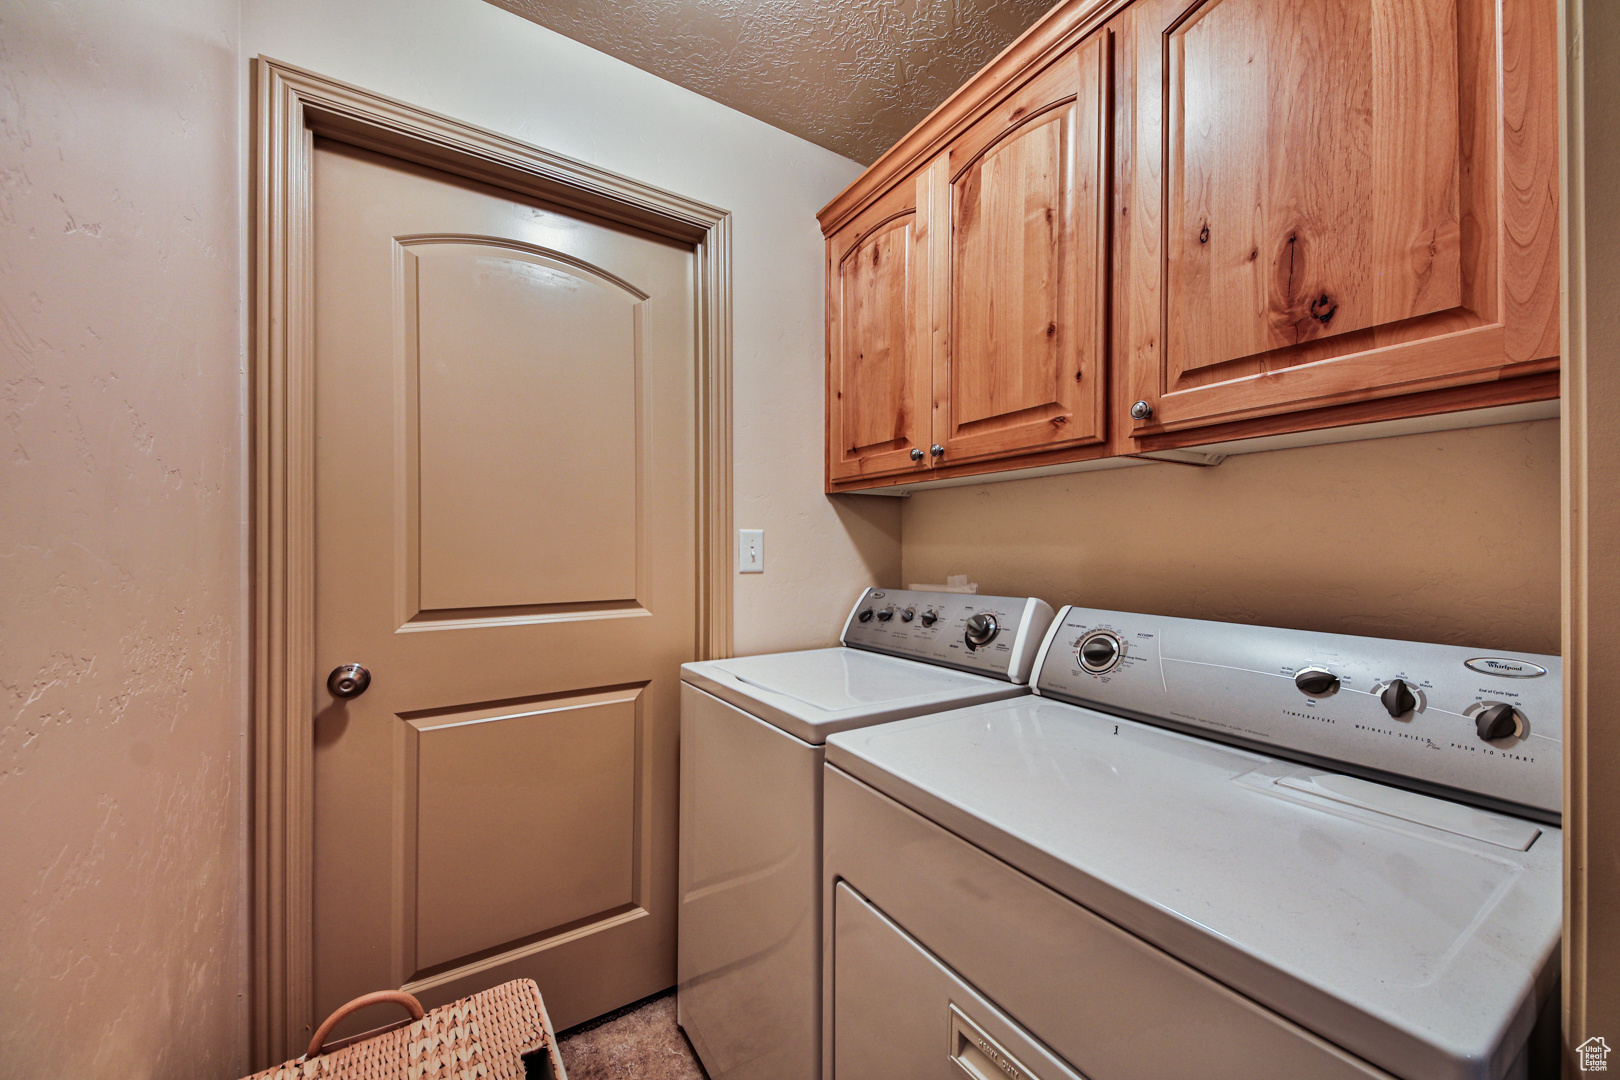 Laundry room with cabinets, separate washer and dryer, and a textured ceiling